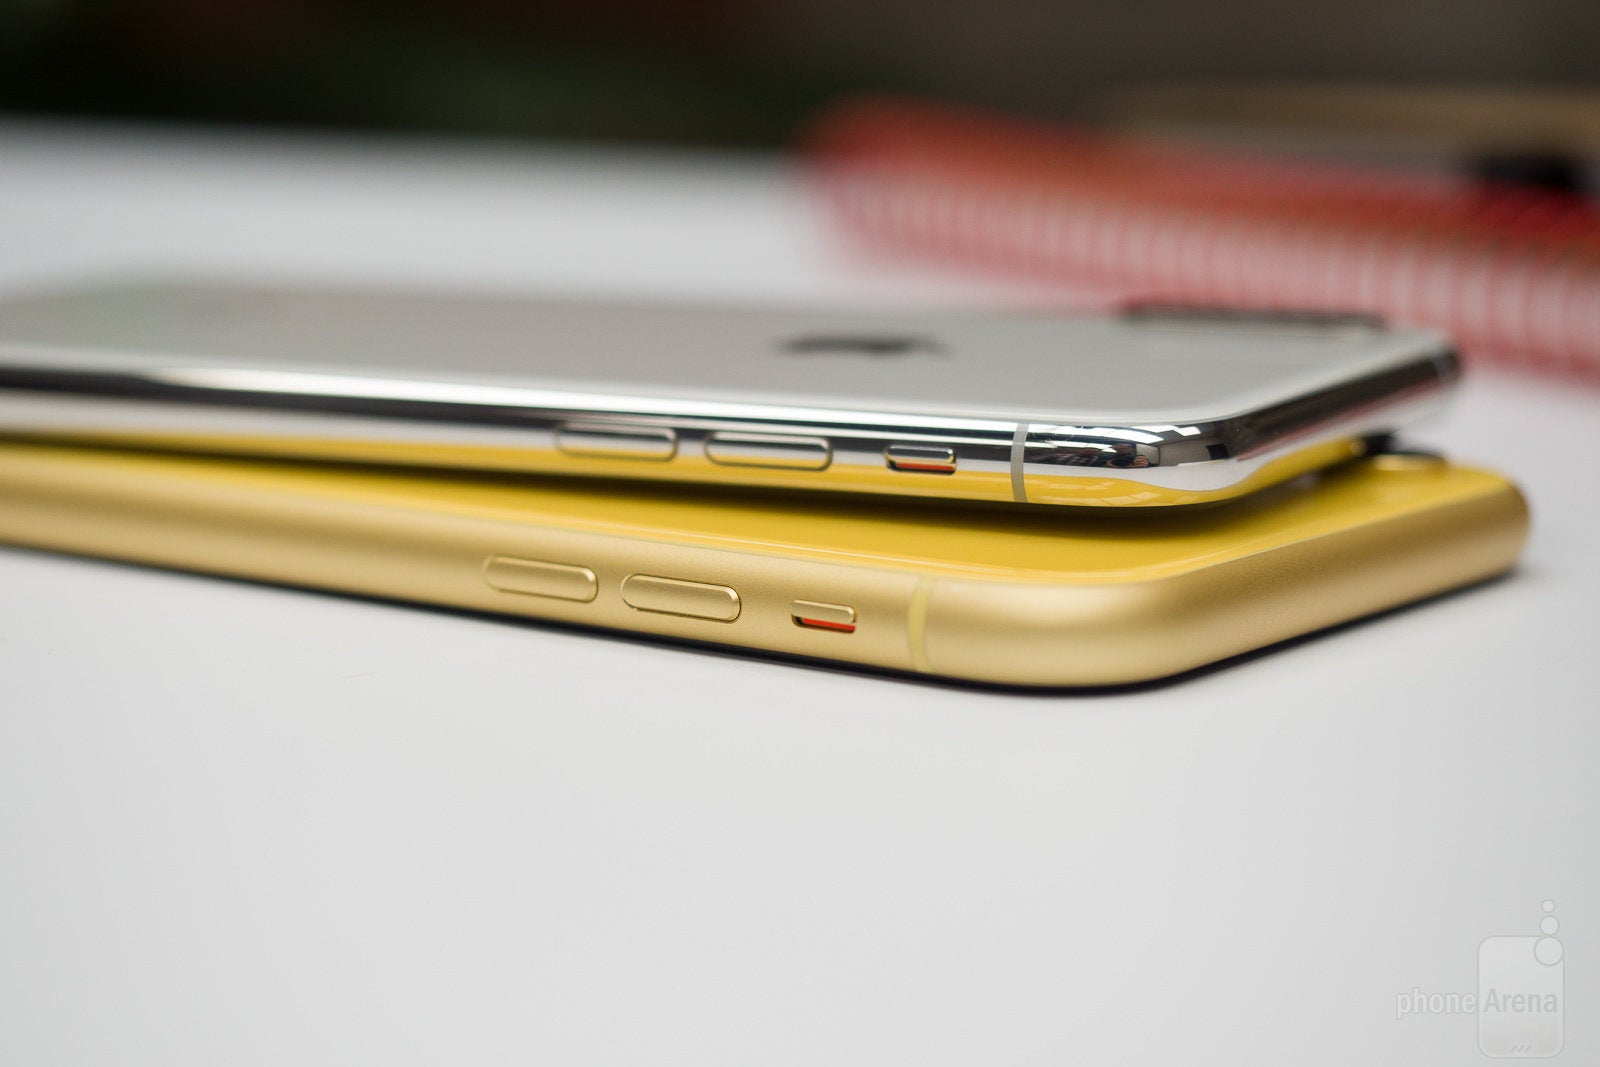 The stainless steel frame of the iPhone XS (top) is stronger than the aluminum frame of the iPhone XR (bottom) - How is a stainless steel iPhone XS better than any other aluminum phone?